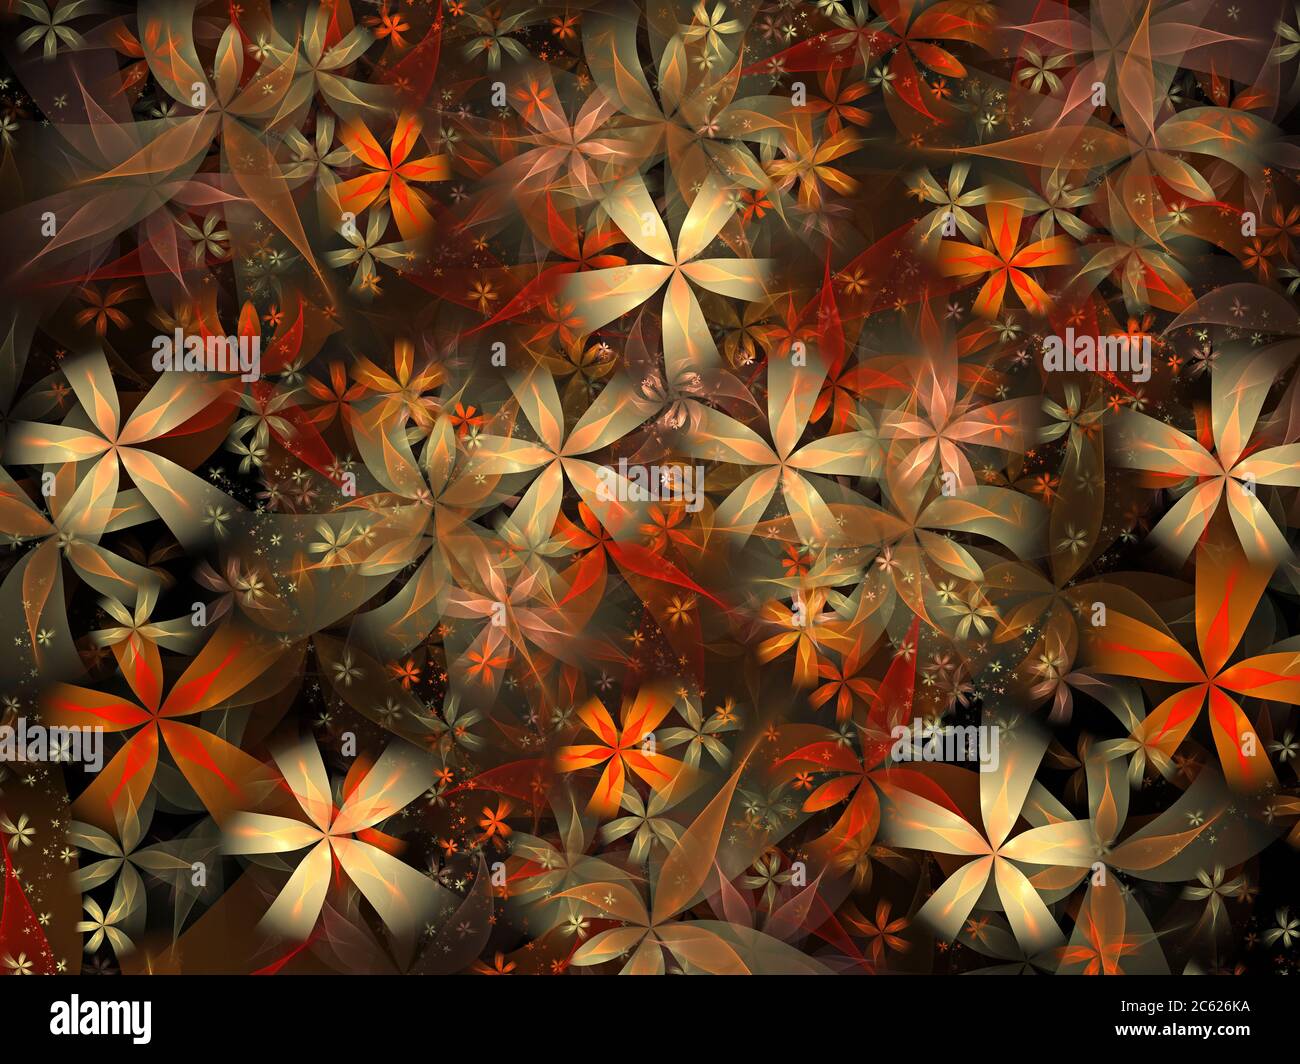 Flame Fractal  - Flowers Design Stock Photo